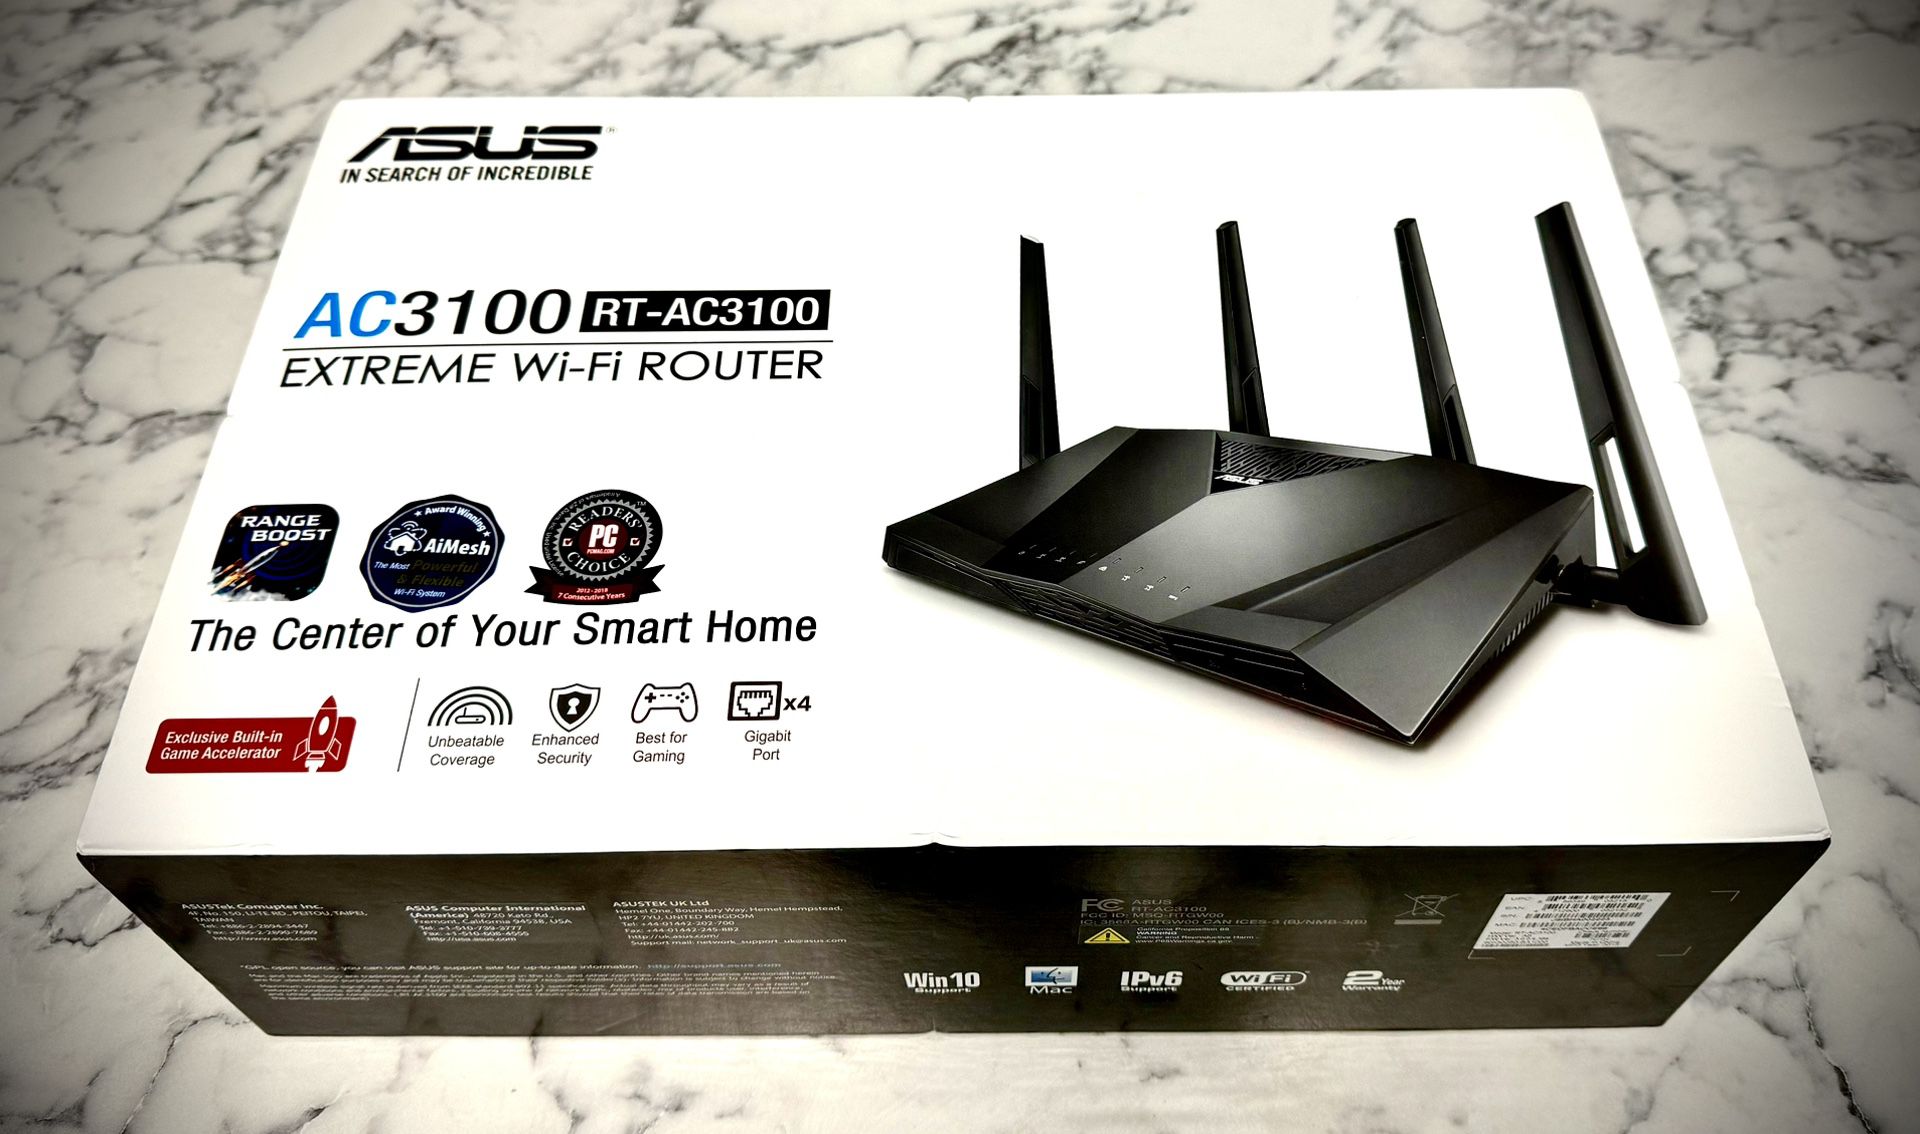 ASUS AC3100 (RT-AC3100) Extreme WiFi Gigabit Router / Repeater / FTP Server / Print Server / HDD Sharing / 3G/4G Sharing